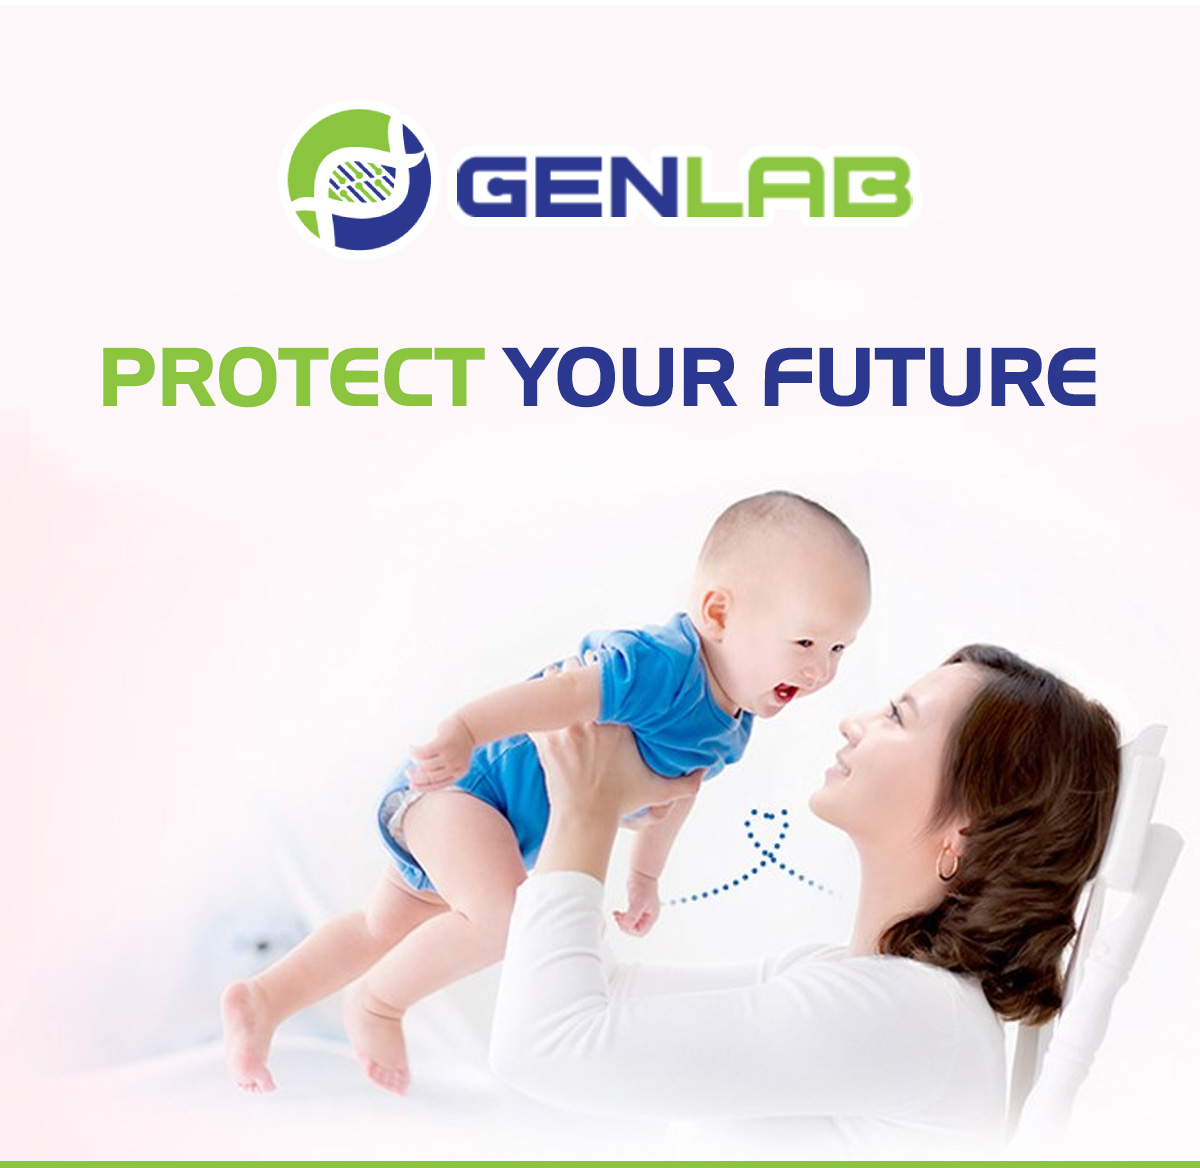 Genlab protect your future